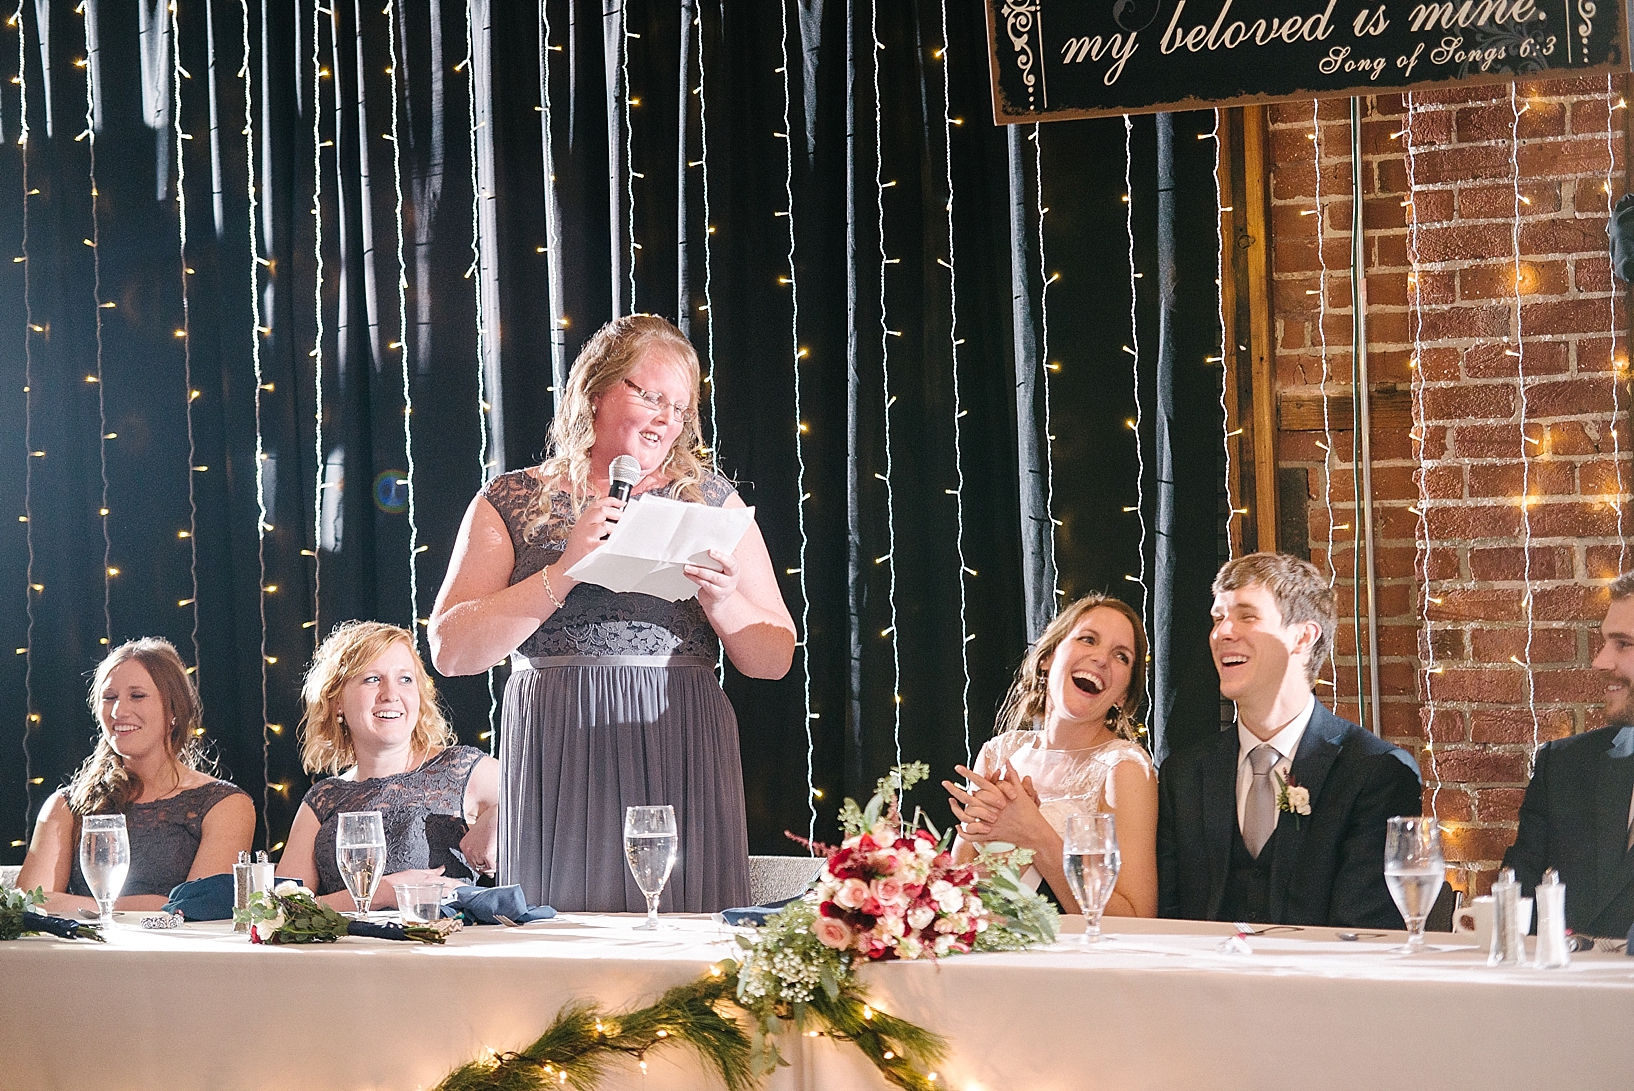 maid of honor giving toast at wedding reception